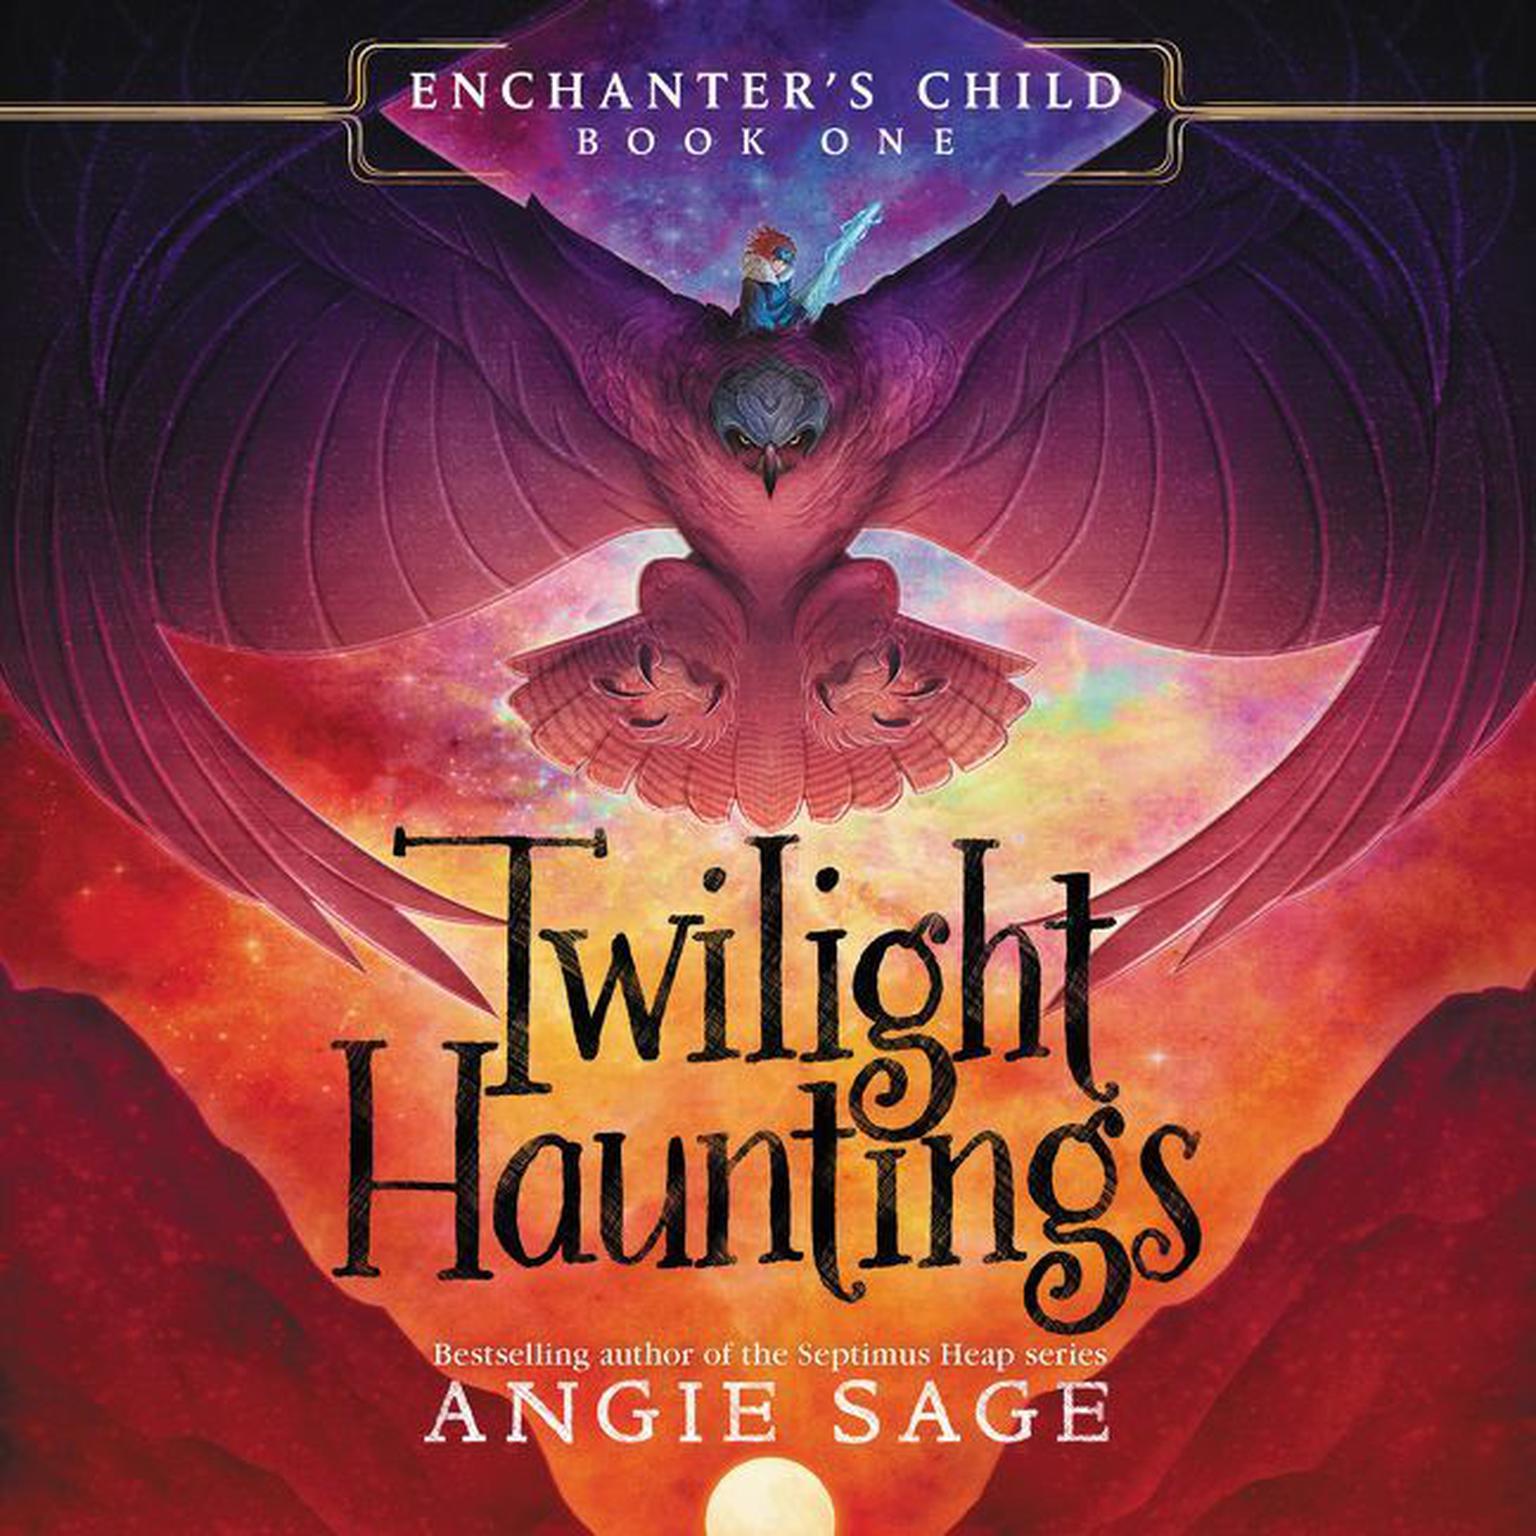 Enchanter's Child, Book One: Twilight Hauntings Audiobook by Angie Sage